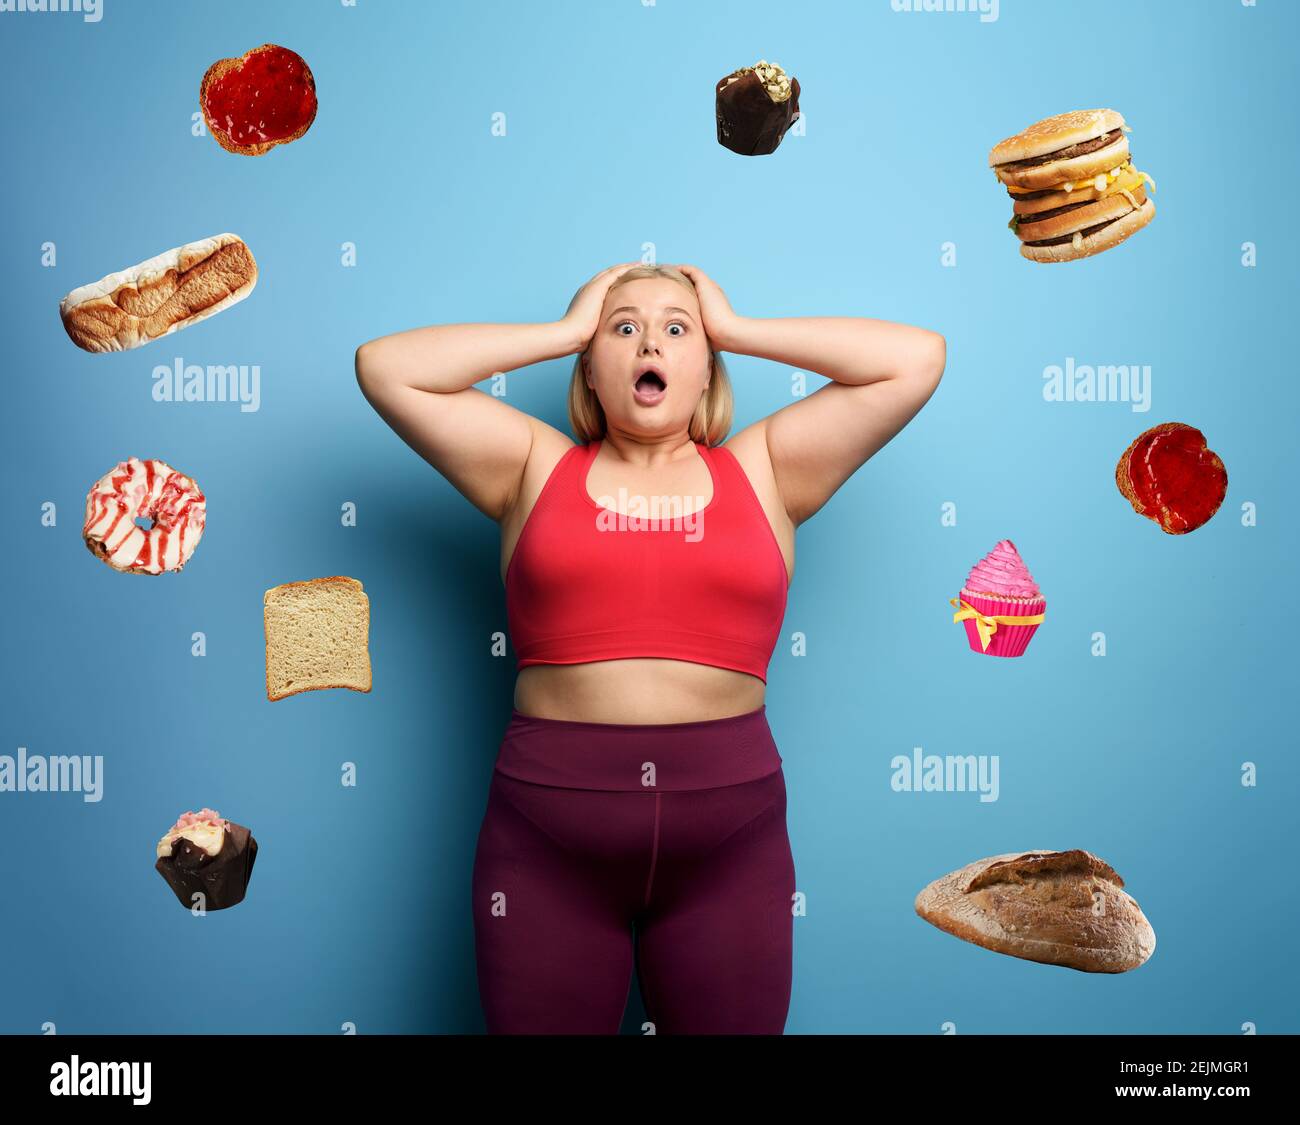 Fat girl in fitness suite wants to start a diet but has doubts about the food to buy. Cyan background Stock Photo